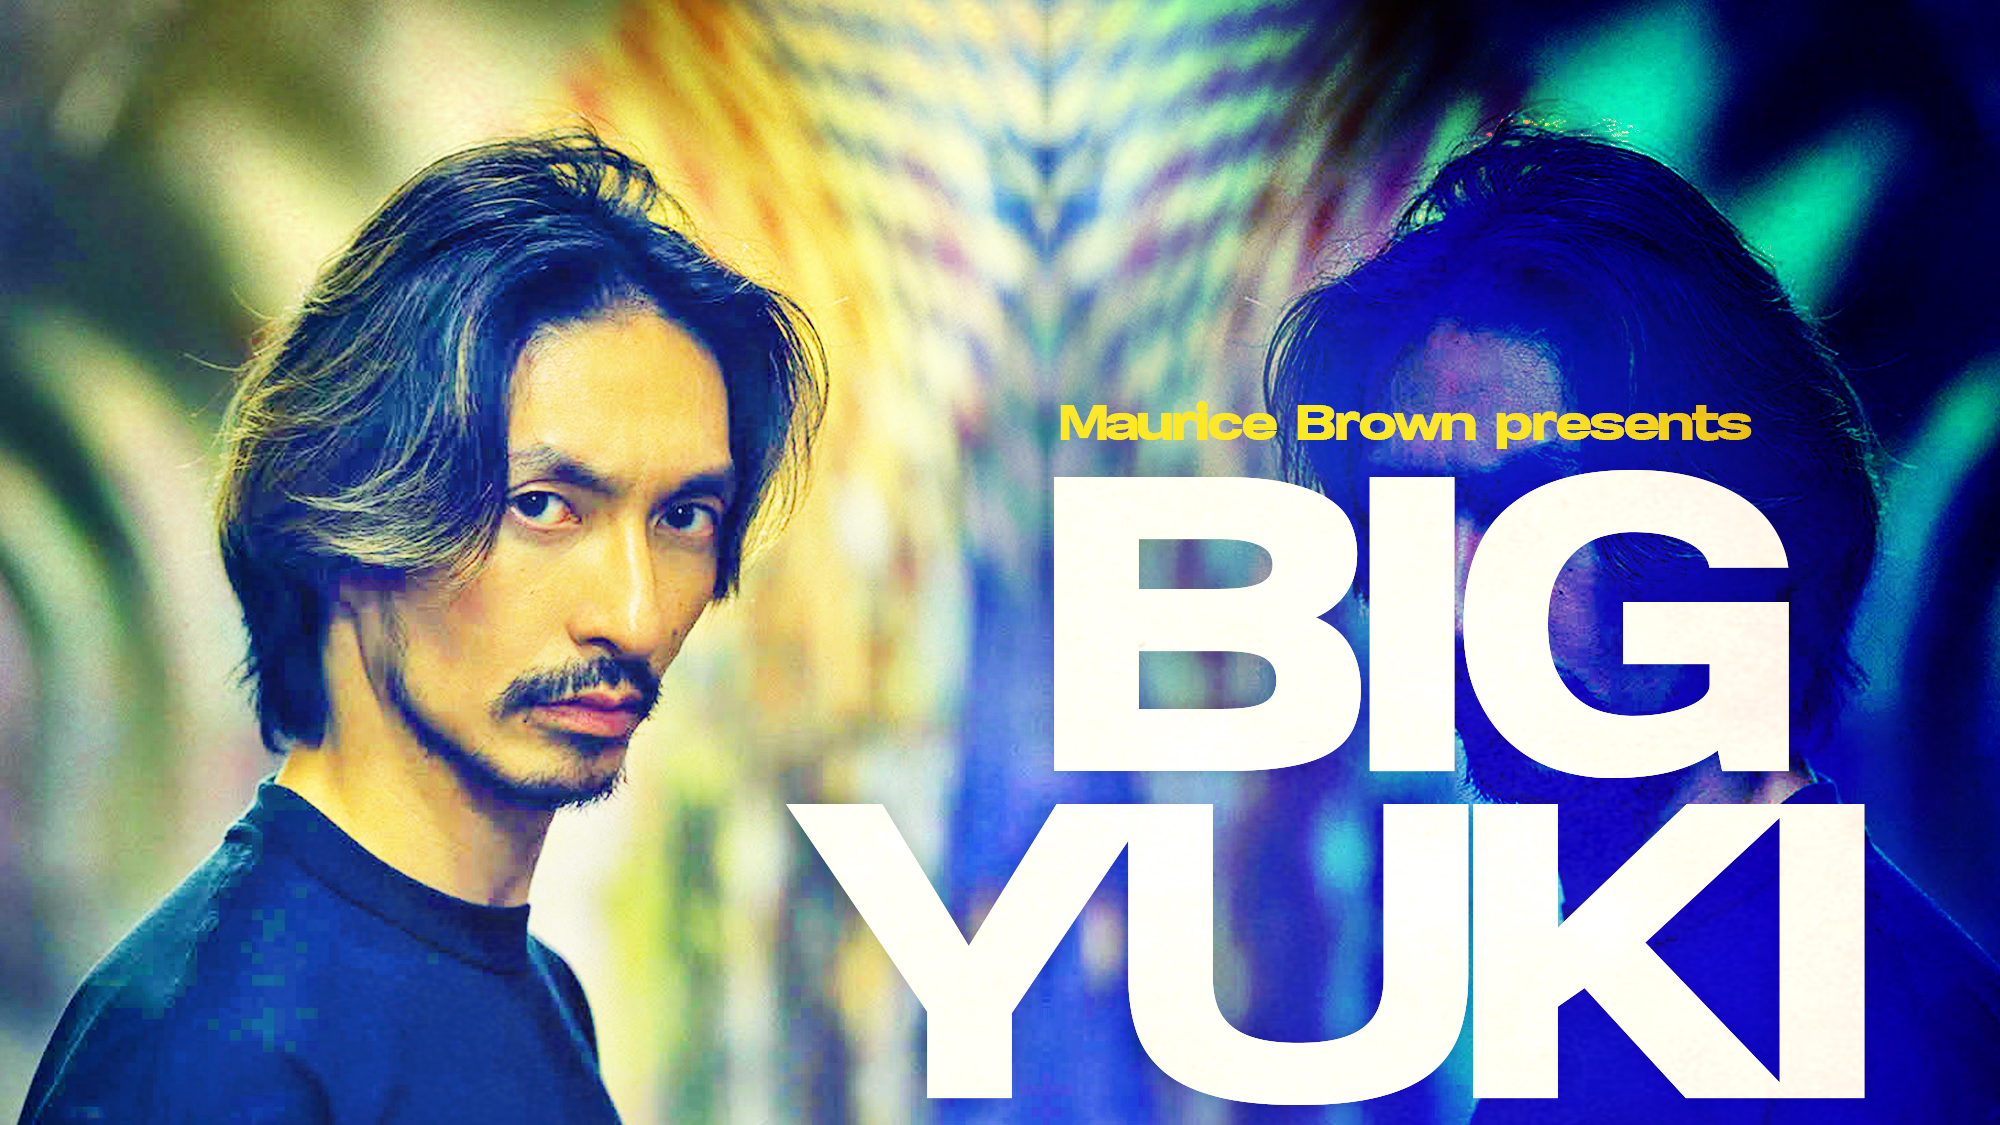 Photo for Mobetta Thursdays Curated By Maurice Brown Presents: Big Yuki  September 16th on ViewStub